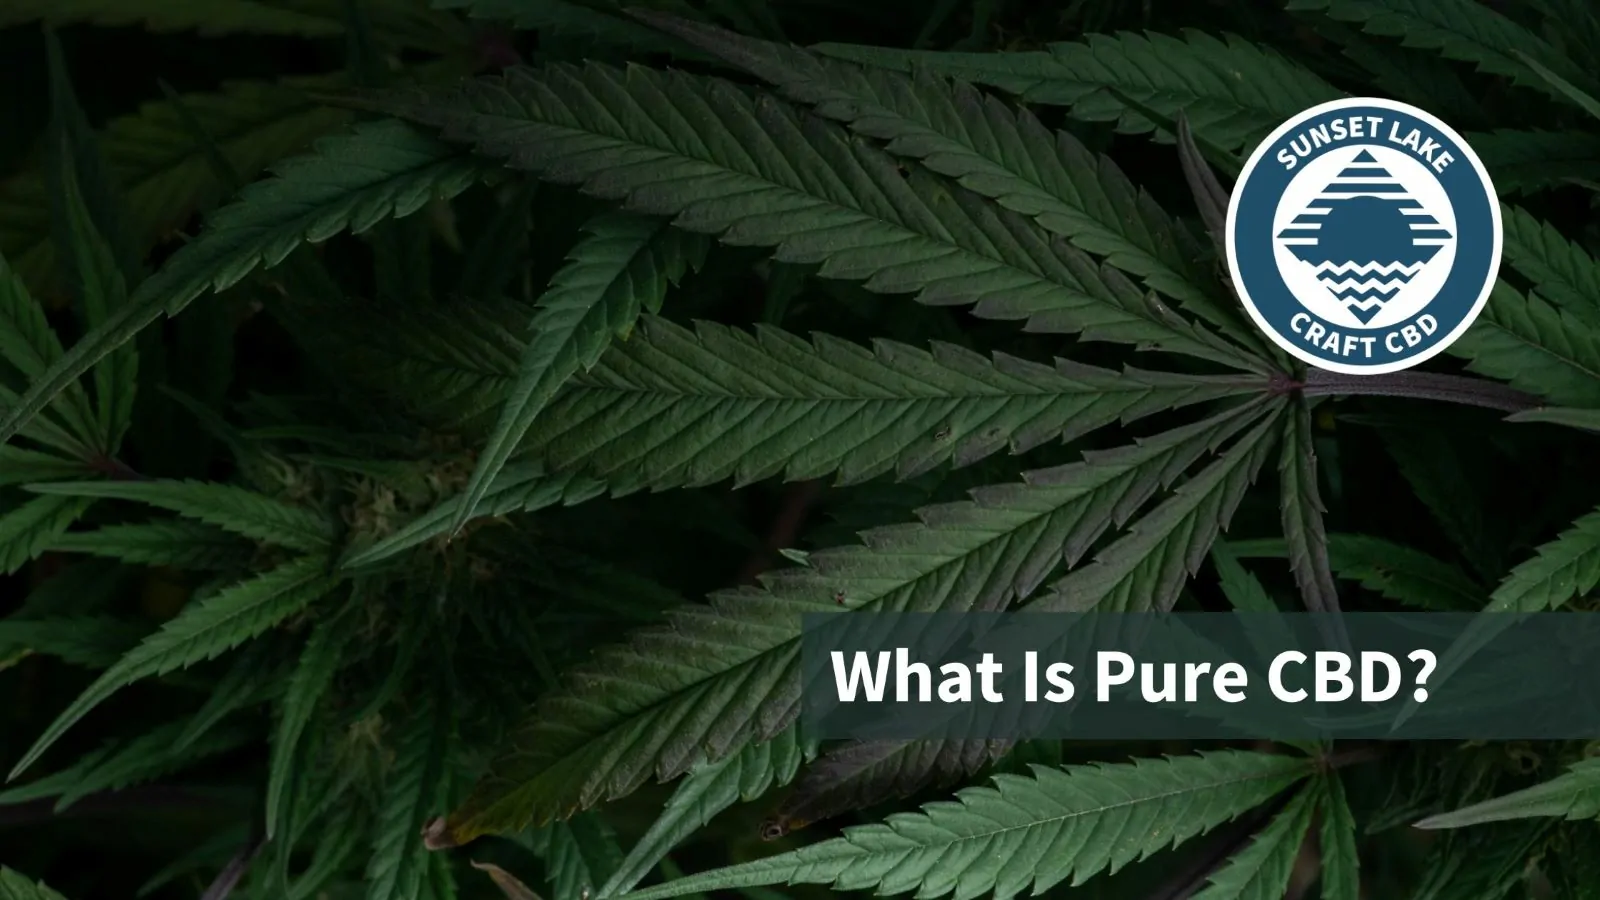 Pure CBD? What The Heck Is That?